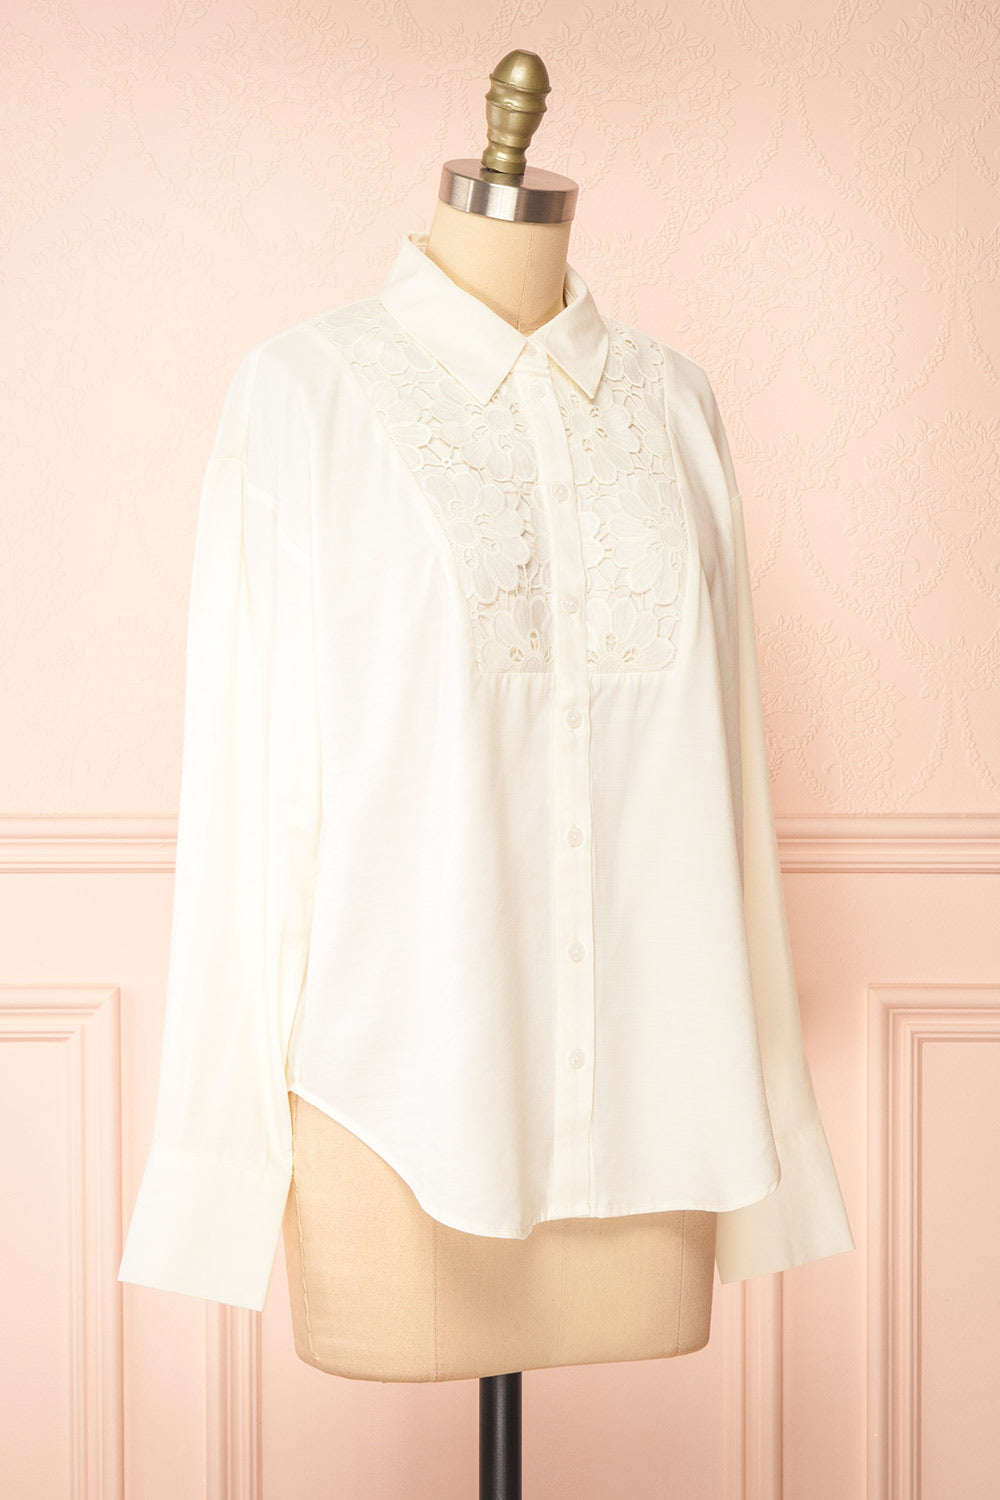 Caselotta Ivory Shirt w/ Embroidered Flowers | Boutique 1861 side view